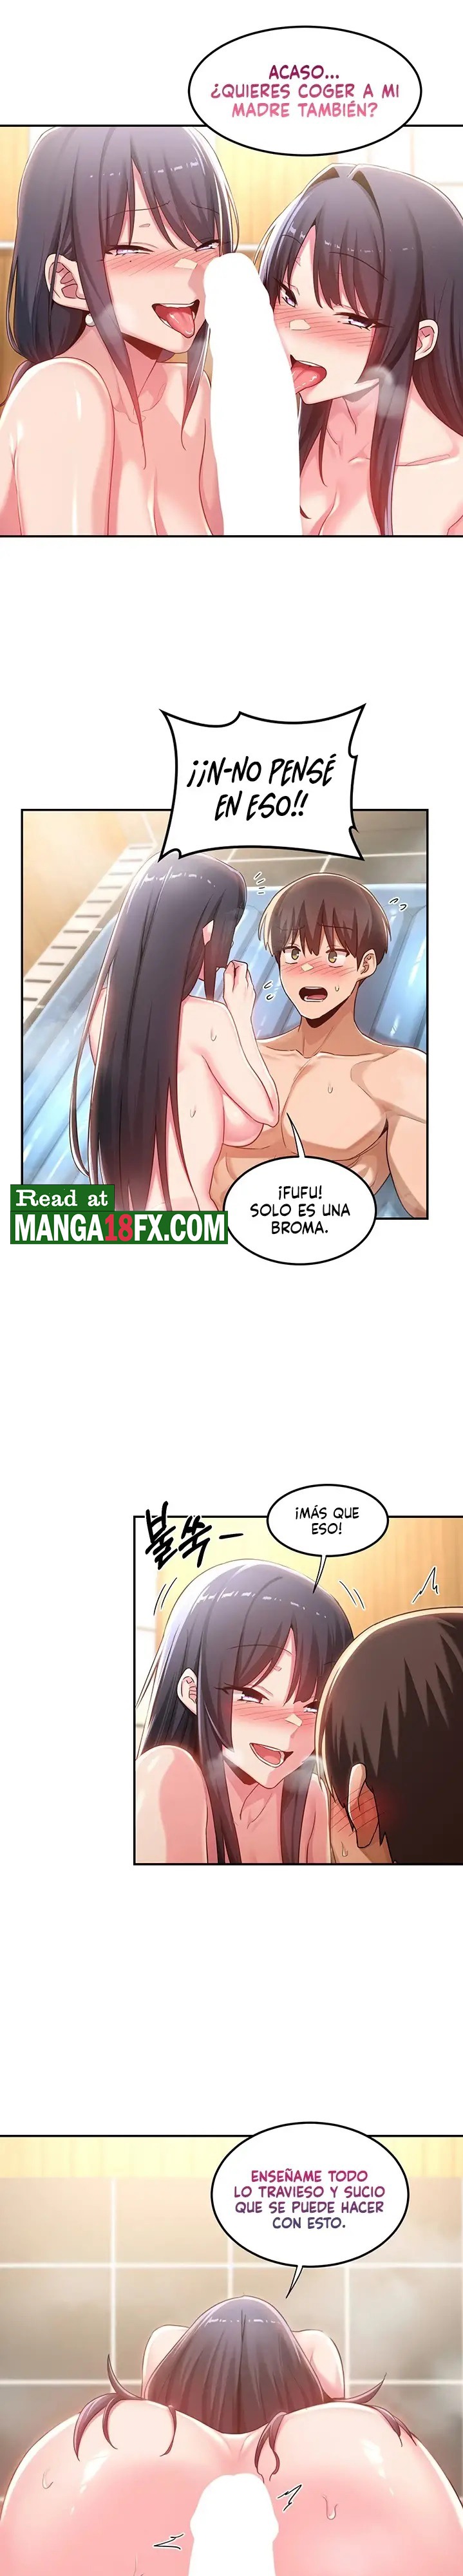 Sextudy Group Raw - Chapter 55 Page 6